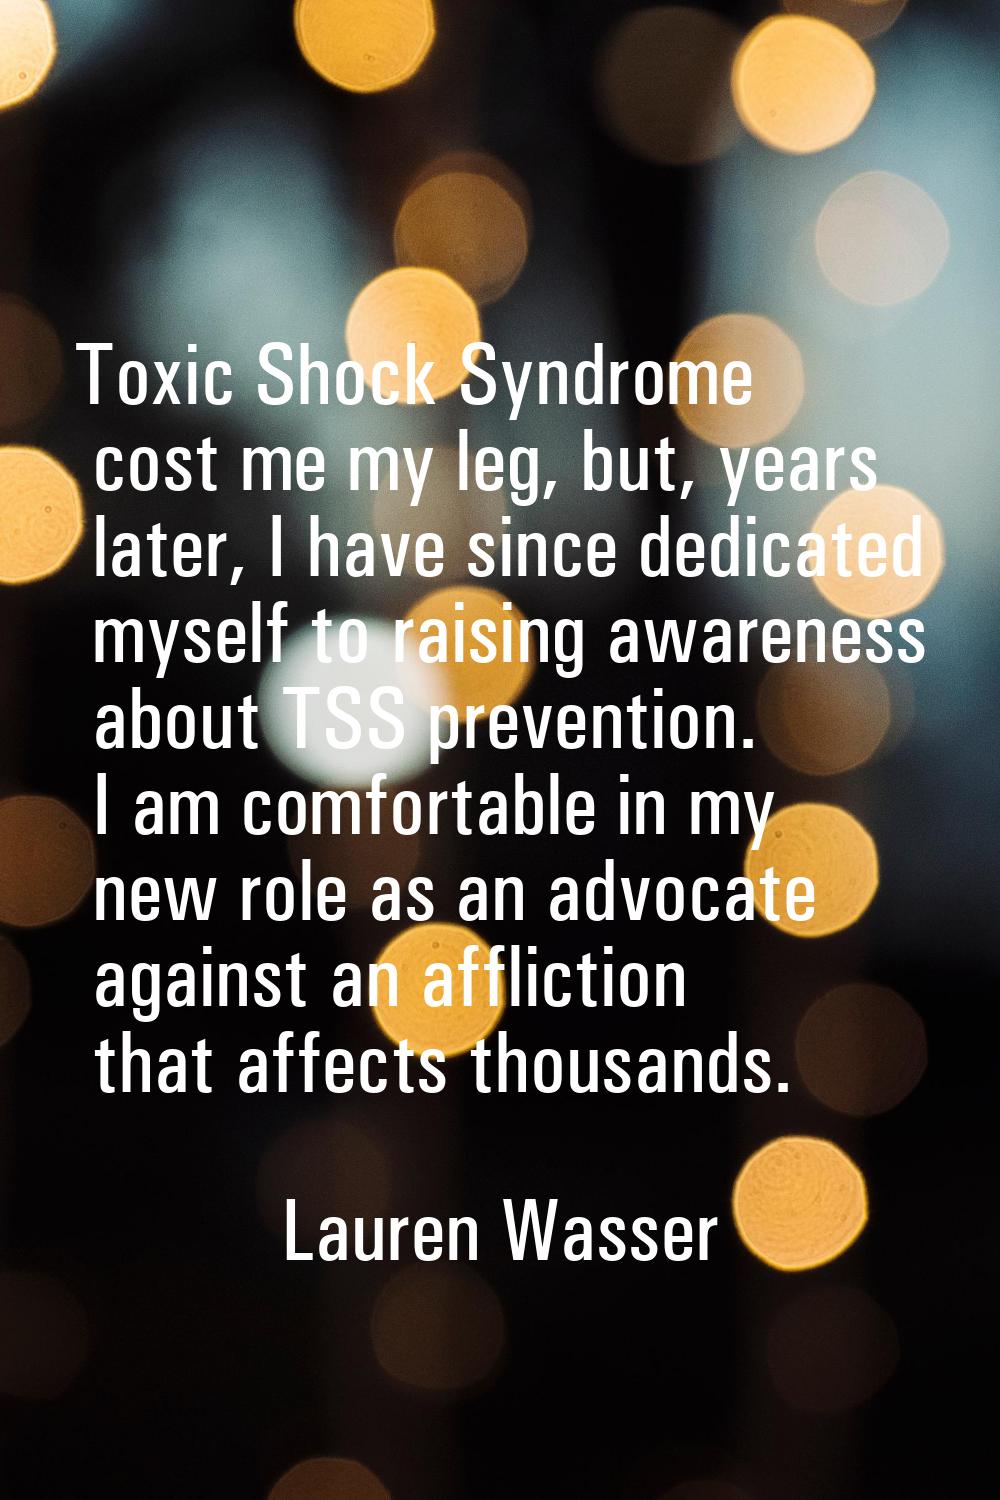 Toxic Shock Syndrome cost me my leg, but, years later, I have since dedicated myself to raising awa